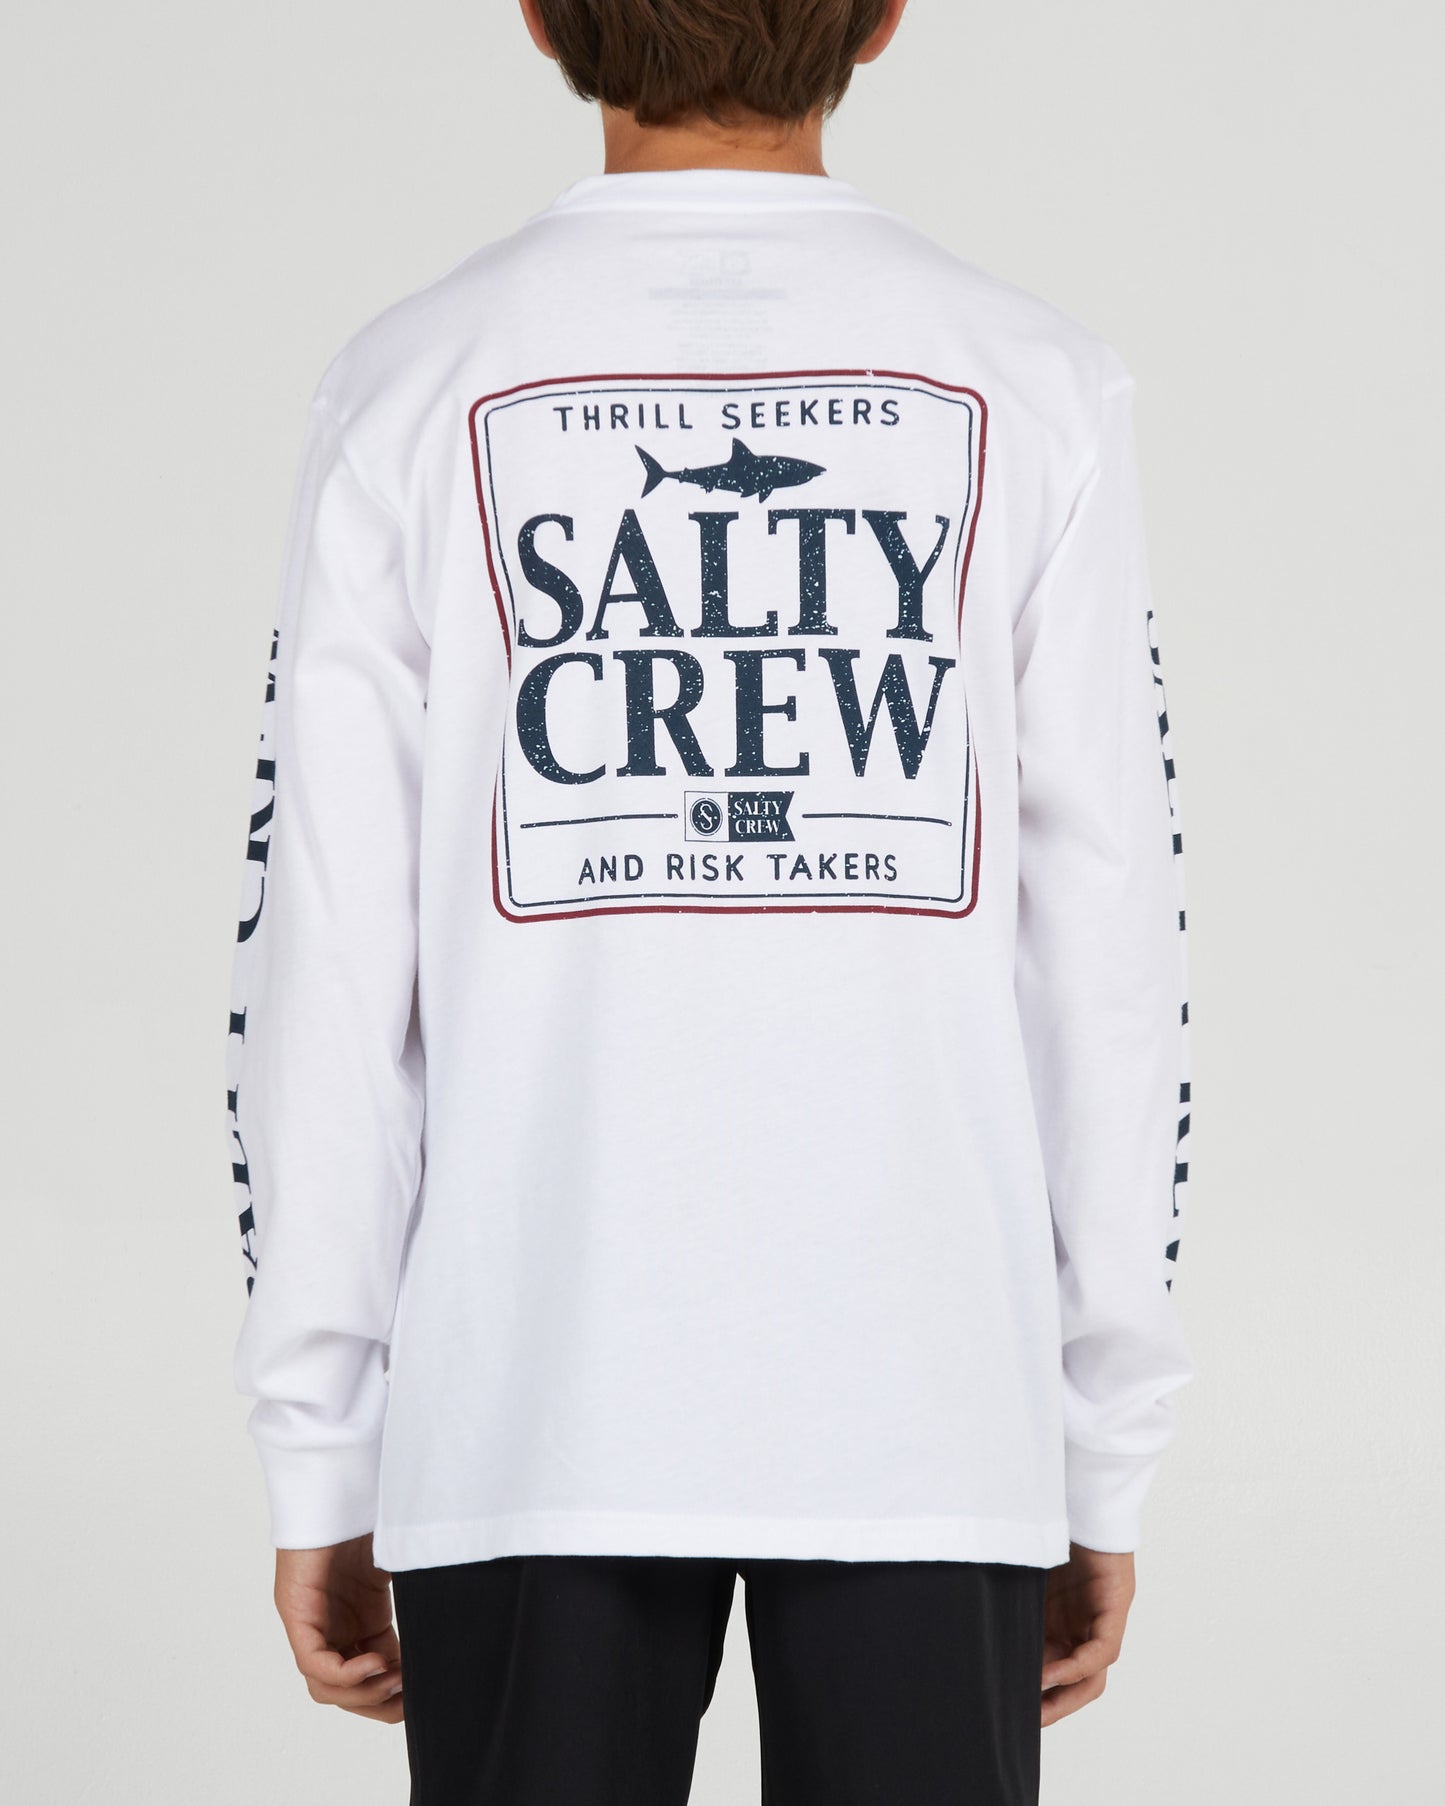 On body back of the Coaster Boys White L/S Tee